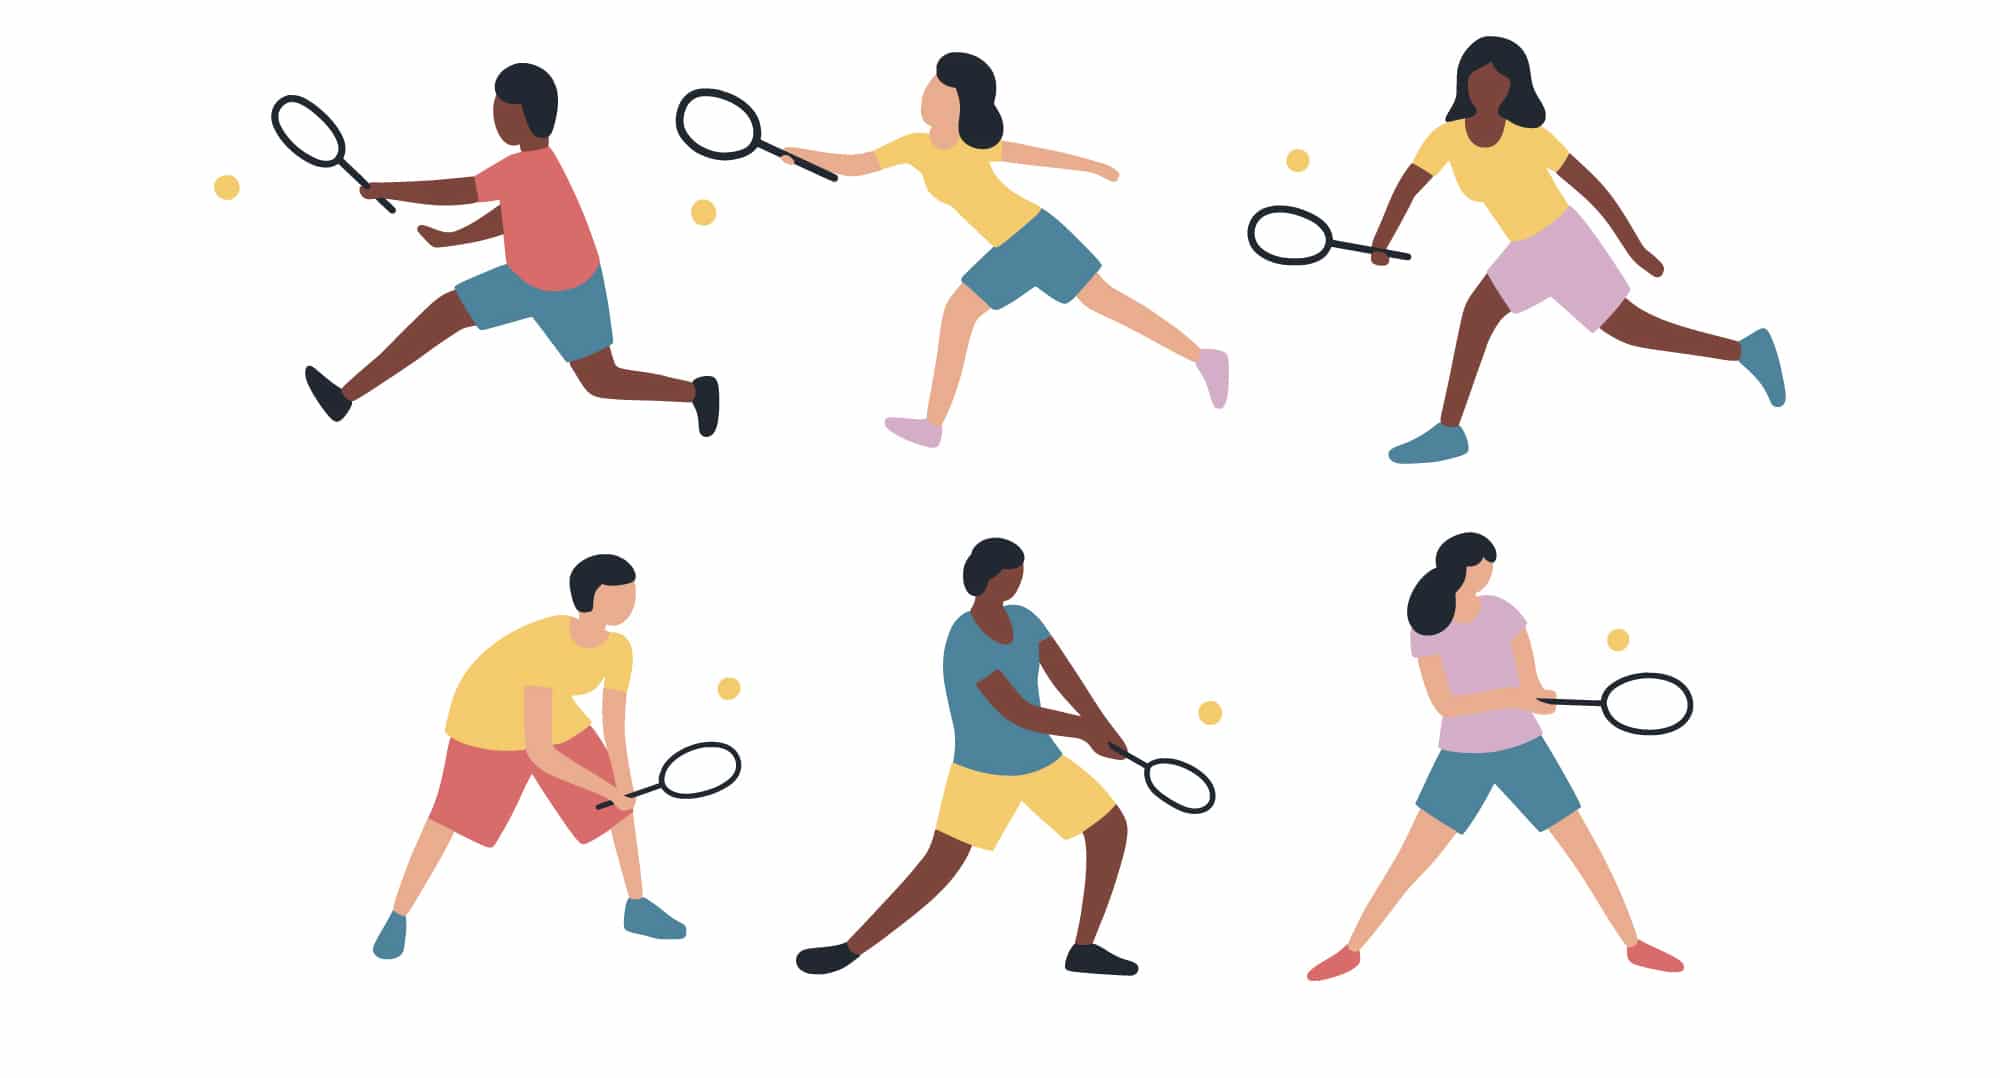 Fancy Giving Your Home Workouts A Tennis Twist?